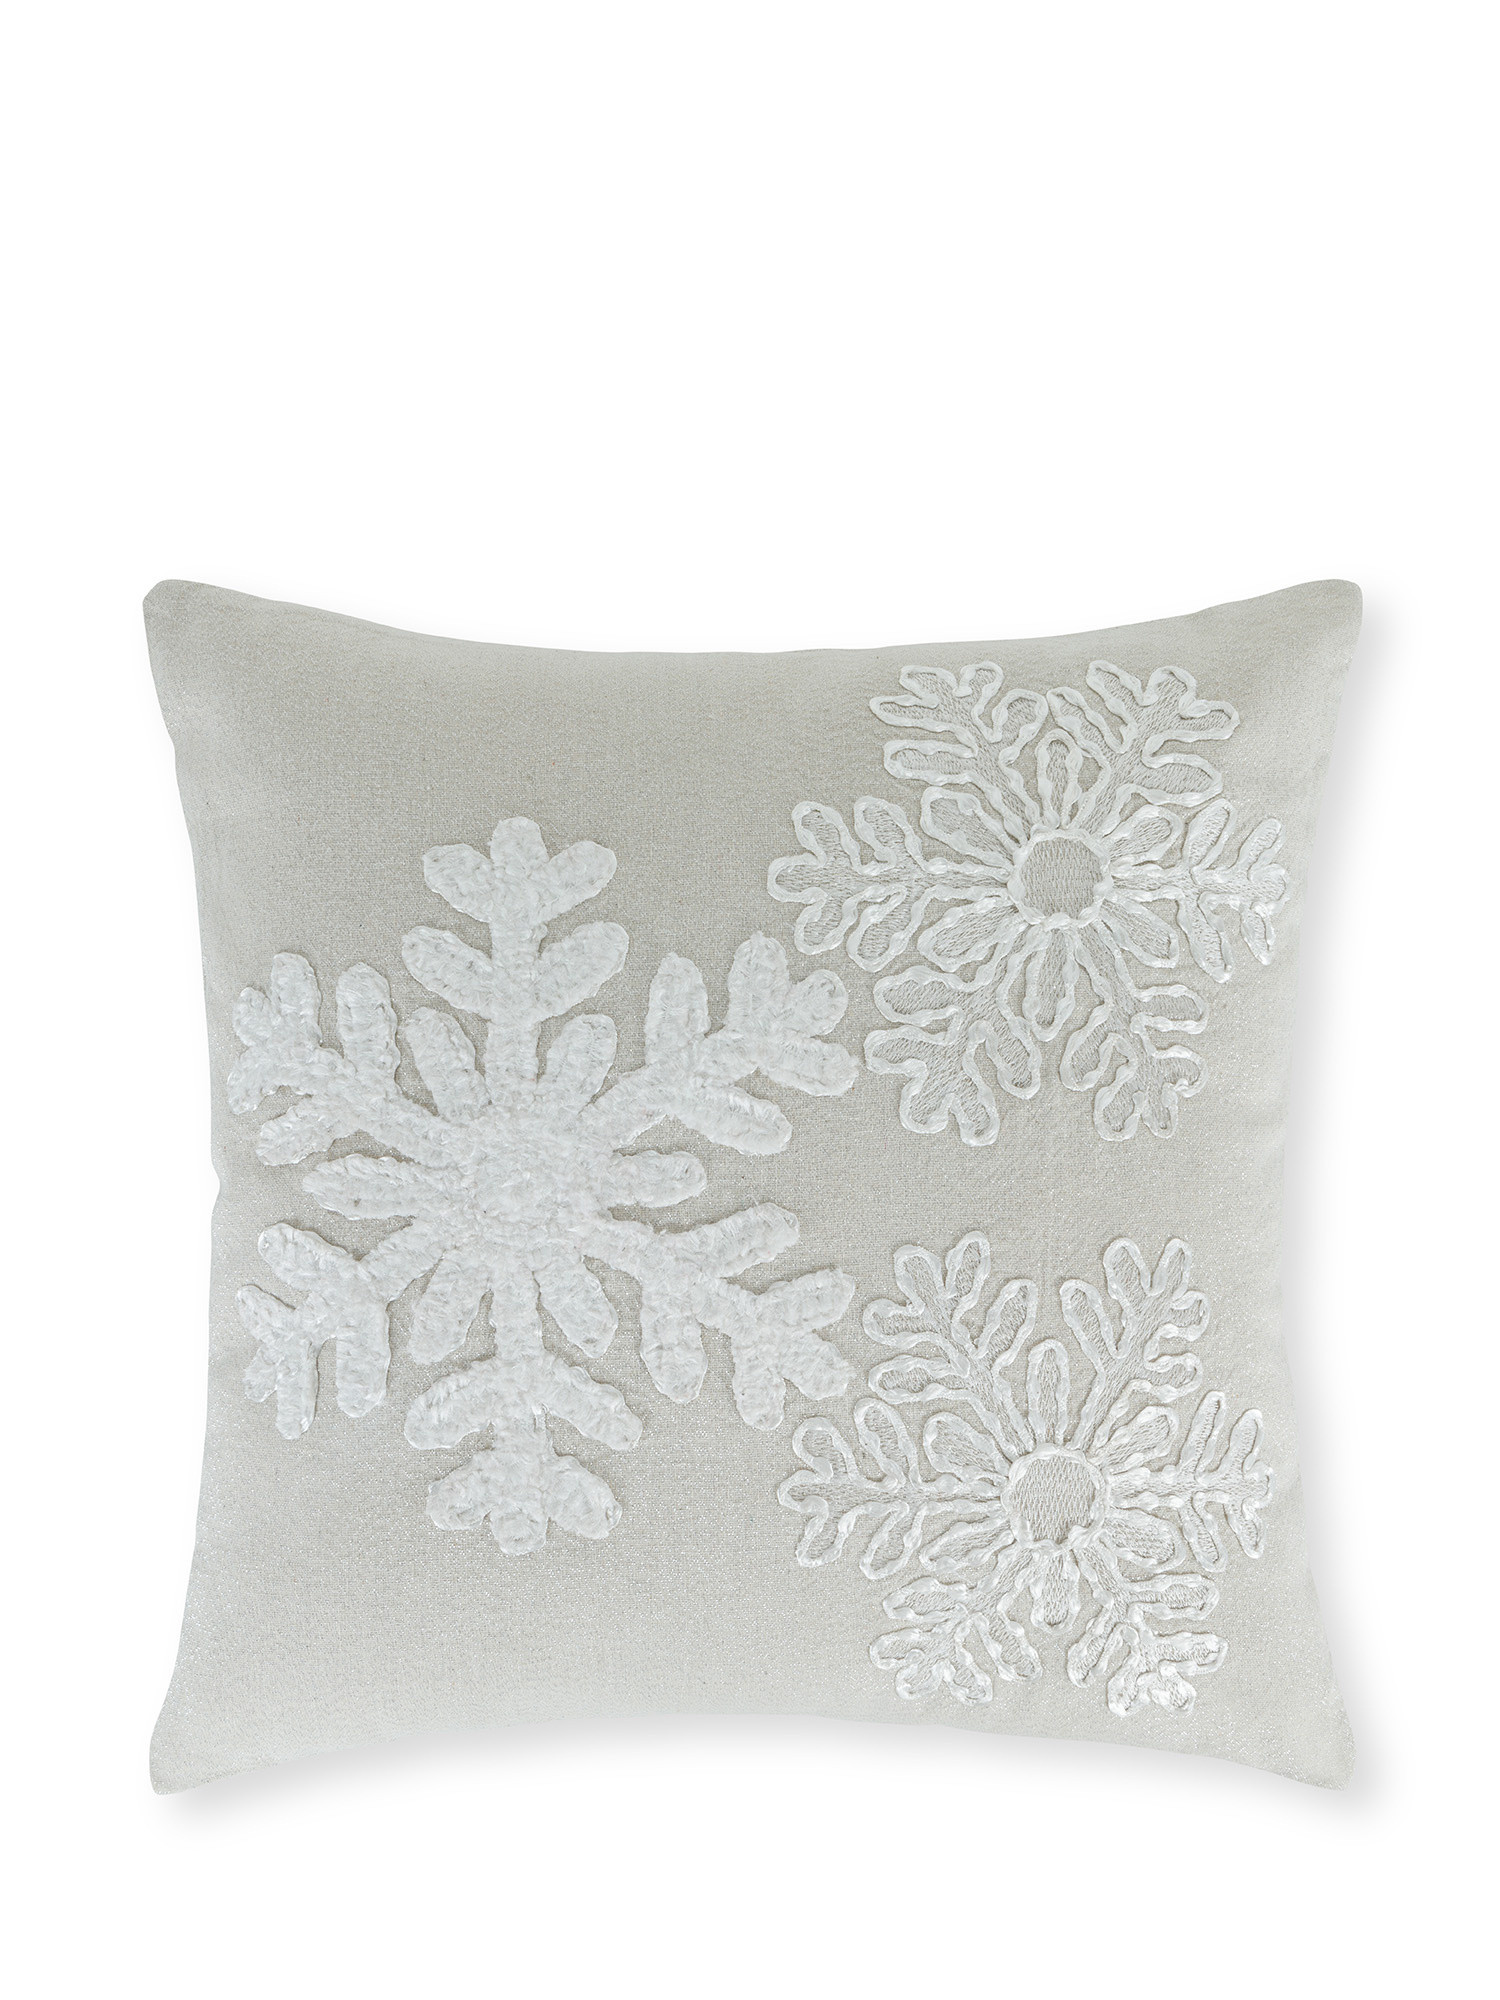 Cushion with snow flakes relief pattern 45x45 cm, White, large image number 0